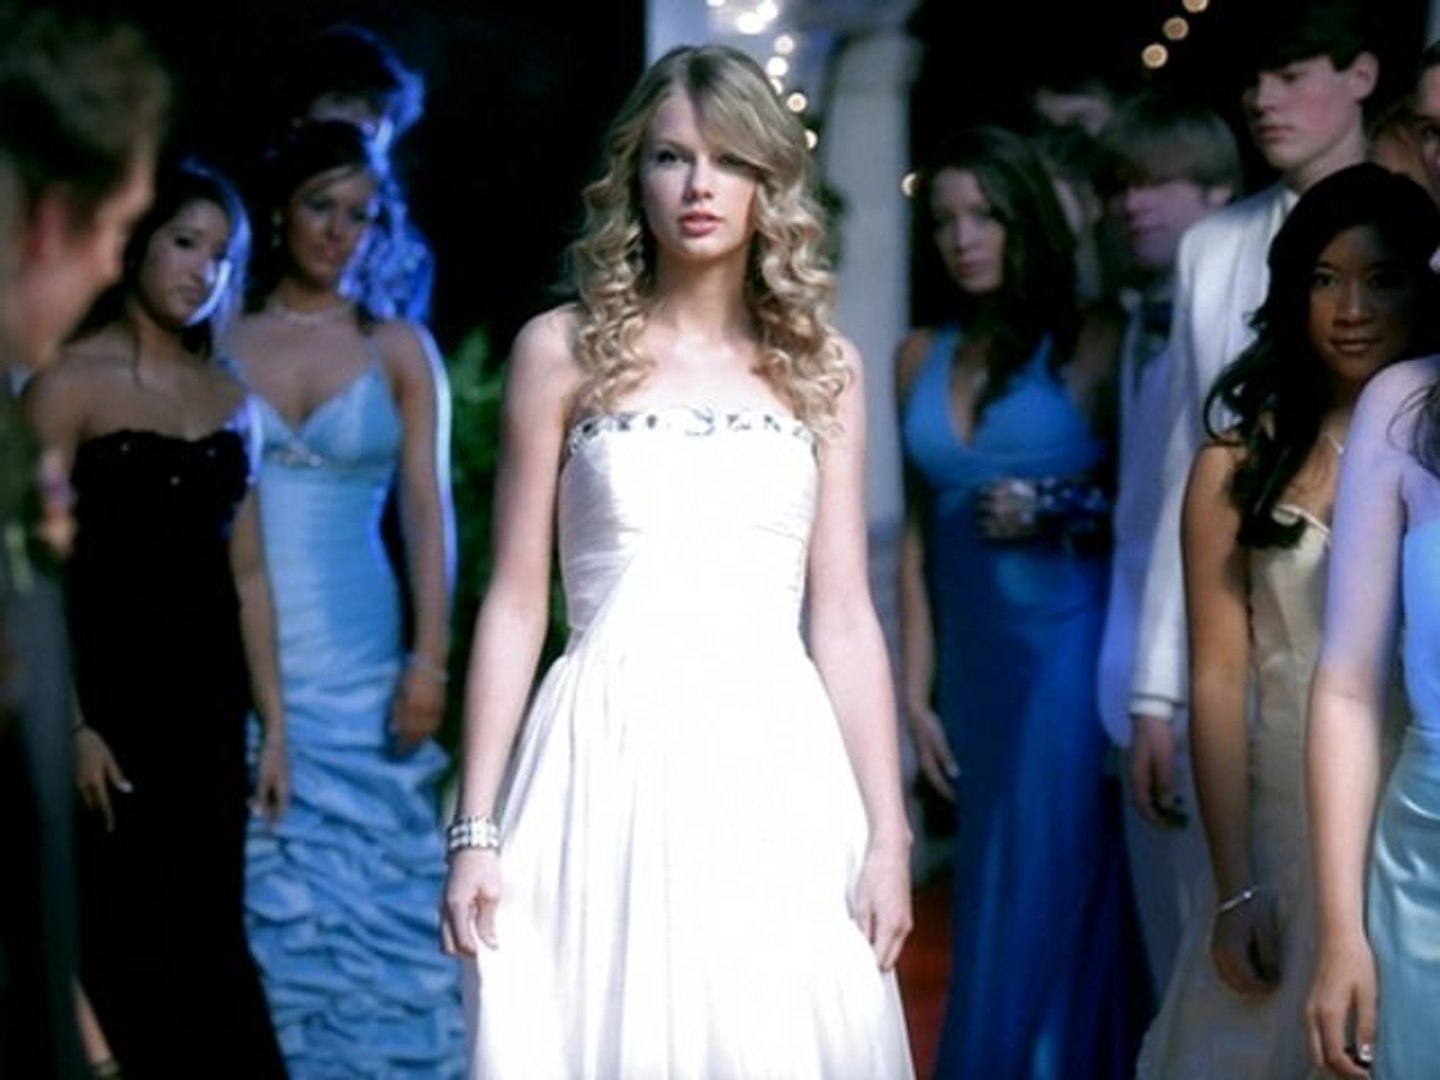 Taylor Swift - You Belong With Me 